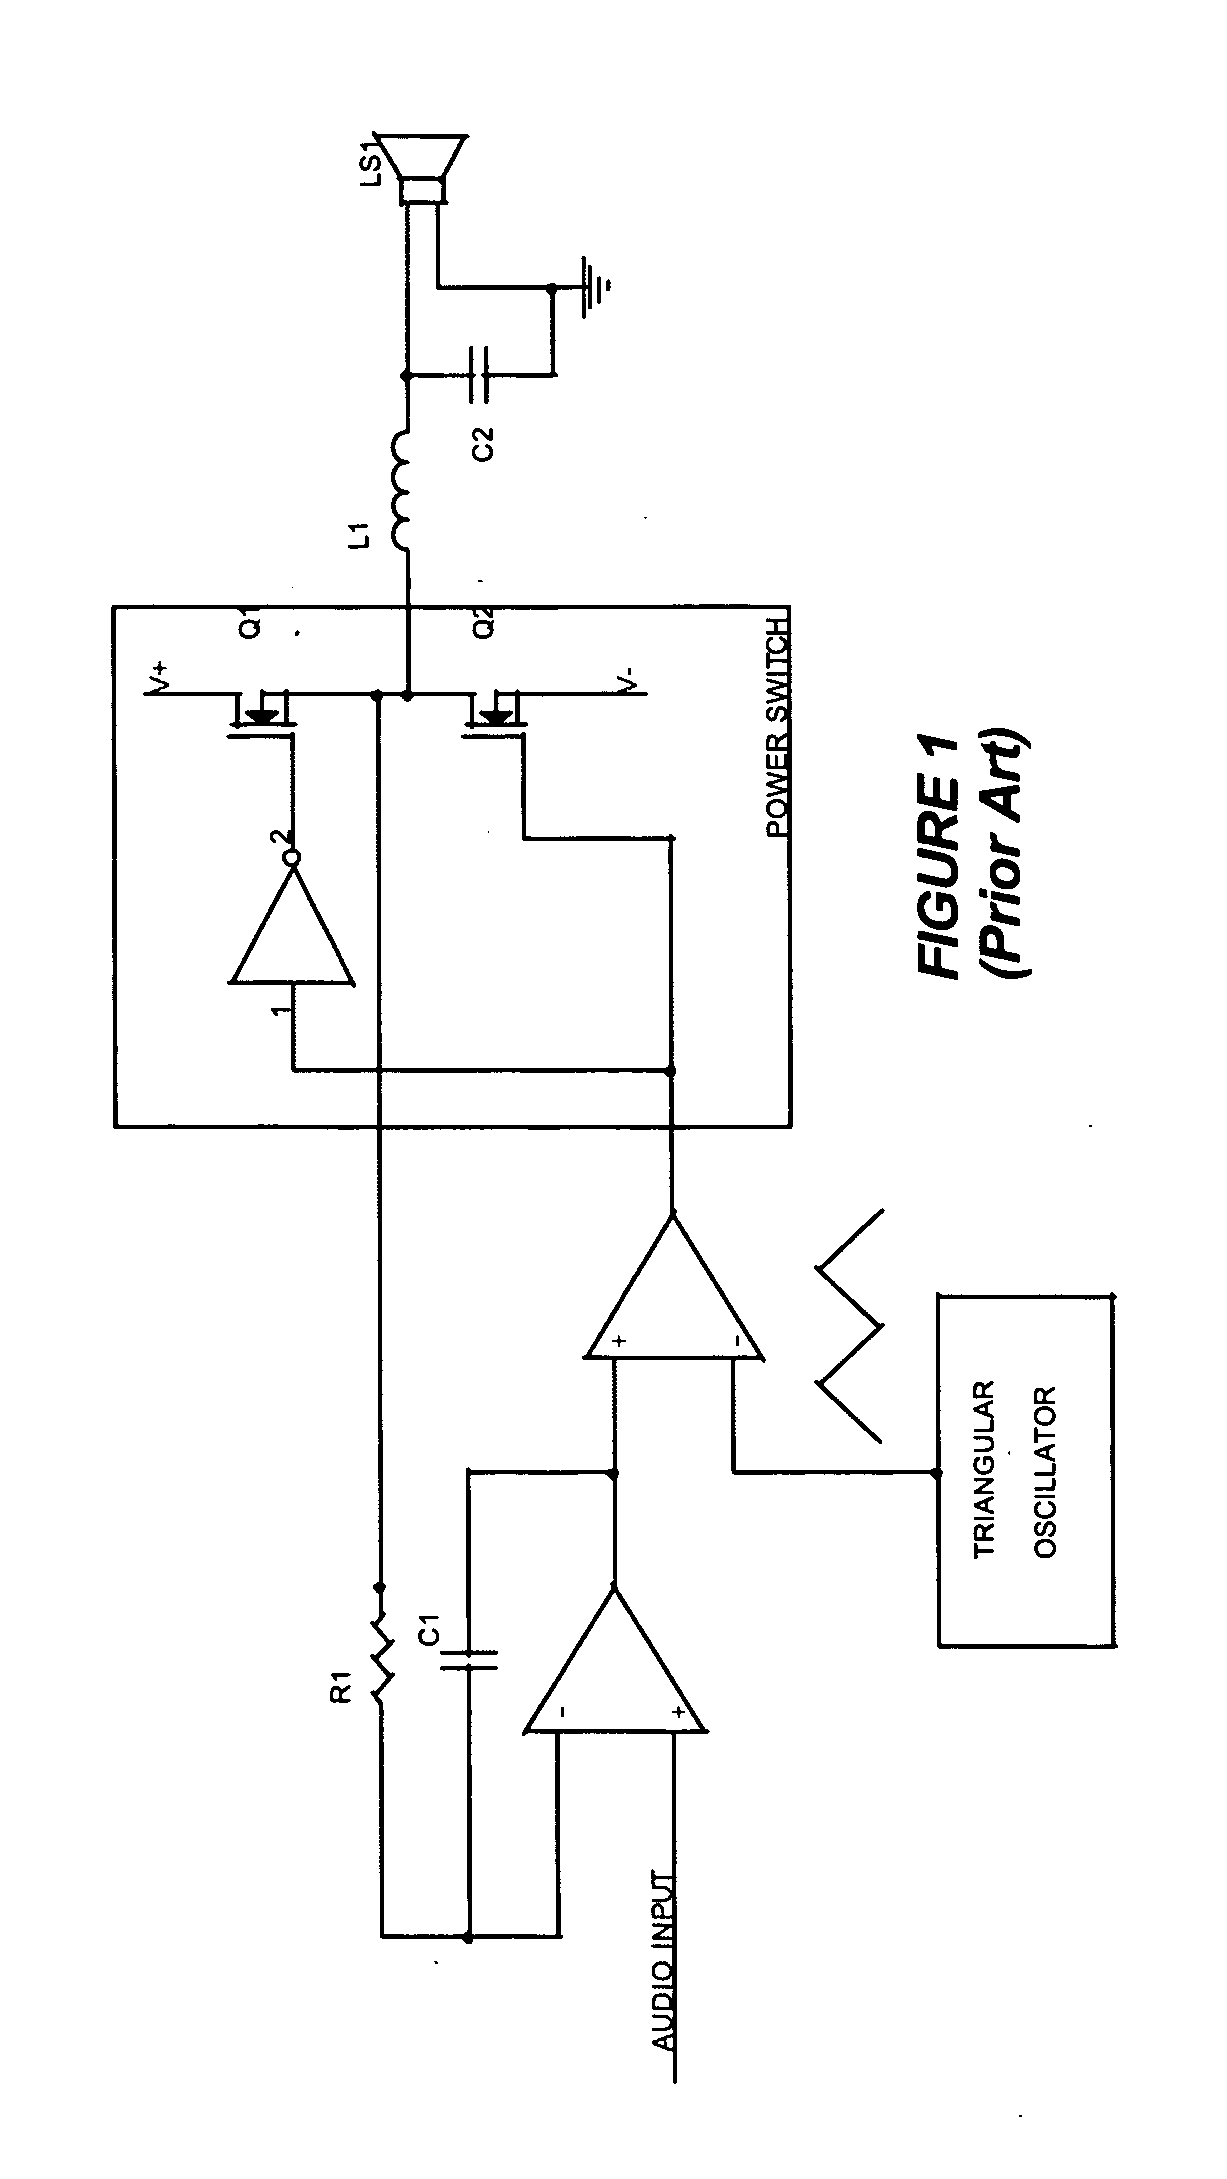 Self-oscillating switching amplifier